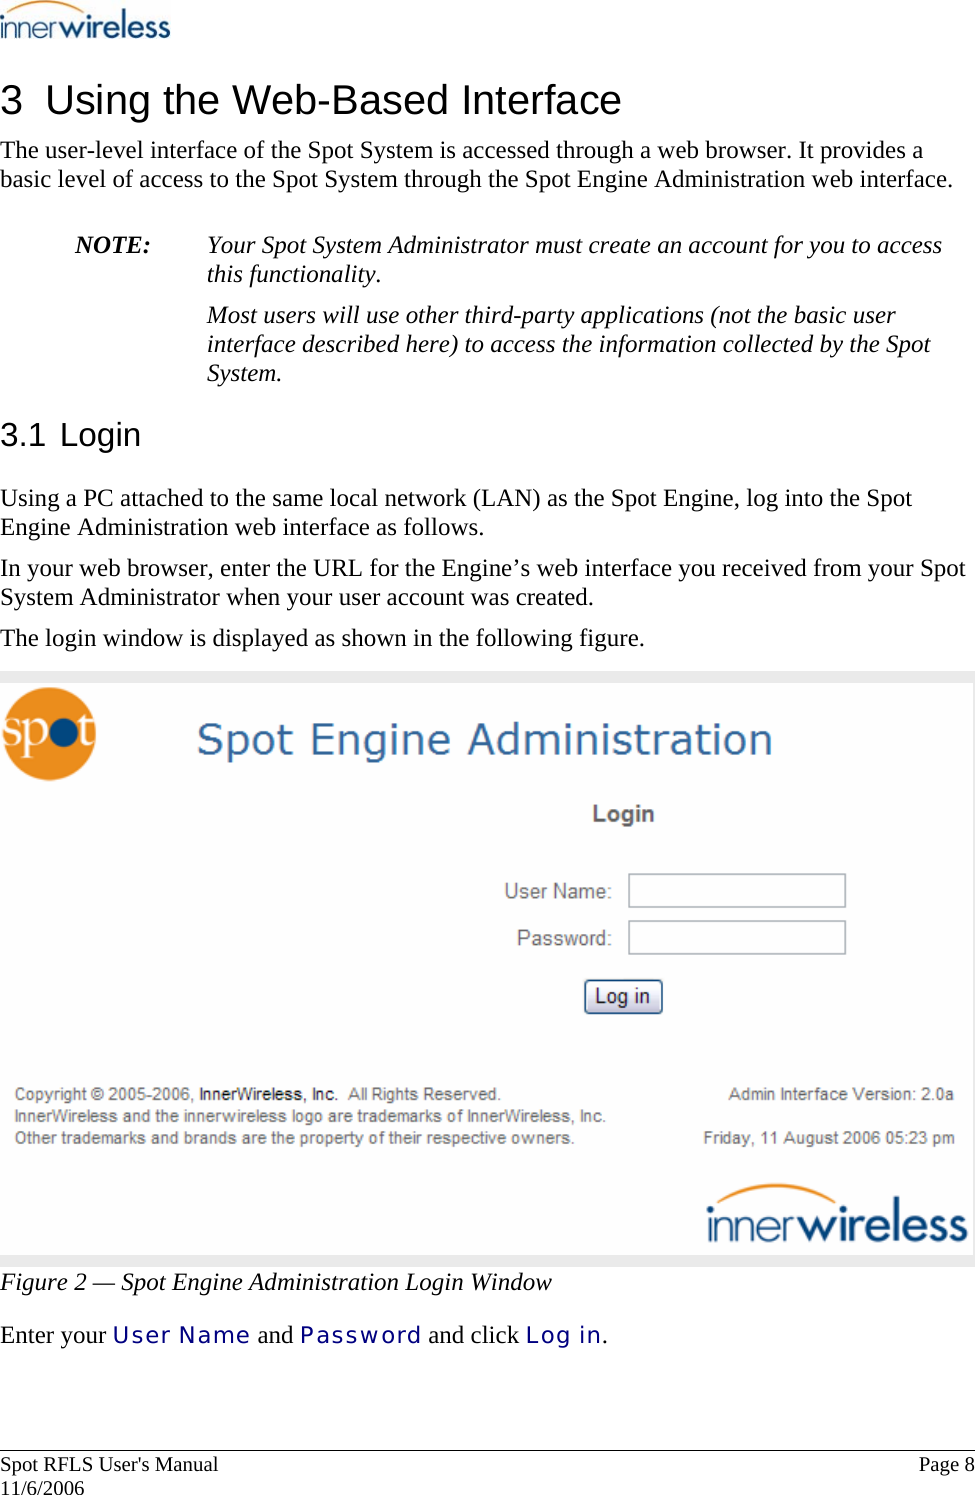       Spot RFLS User&apos;s Manual  Page 8   11/6/2006 3  Using the Web-Based Interface The user-level interface of the Spot System is accessed through a web browser. It provides a basic level of access to the Spot System through the Spot Engine Administration web interface.  NOTE:  Your Spot System Administrator must create an account for you to access this functionality. Most users will use other third-party applications (not the basic user interface described here) to access the information collected by the Spot System. 3.1 Login Using a PC attached to the same local network (LAN) as the Spot Engine, log into the Spot Engine Administration web interface as follows. In your web browser, enter the URL for the Engine’s web interface you received from your Spot System Administrator when your user account was created. The login window is displayed as shown in the following figure. Figure 2 — Spot Engine Administration Login Window Enter your User Name and Password and click Log in.   